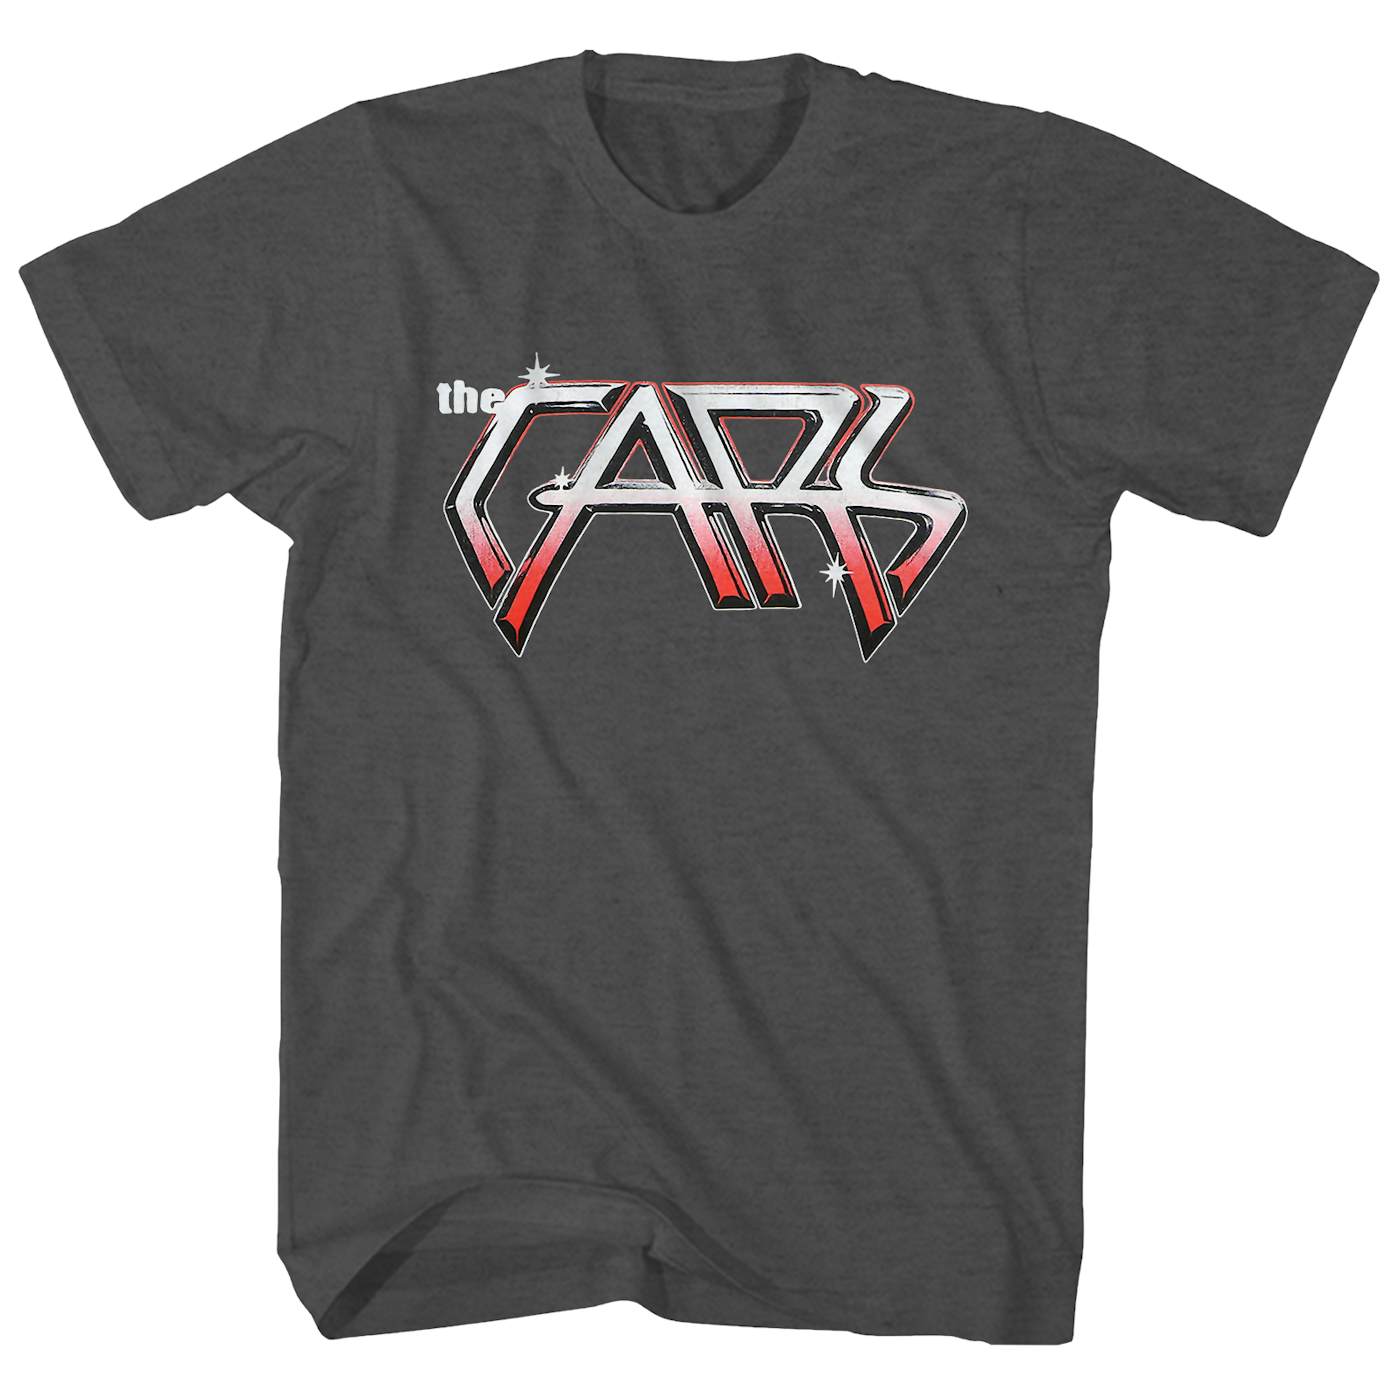 The Cars T-Shirt | Official Logo The Cars Shirt